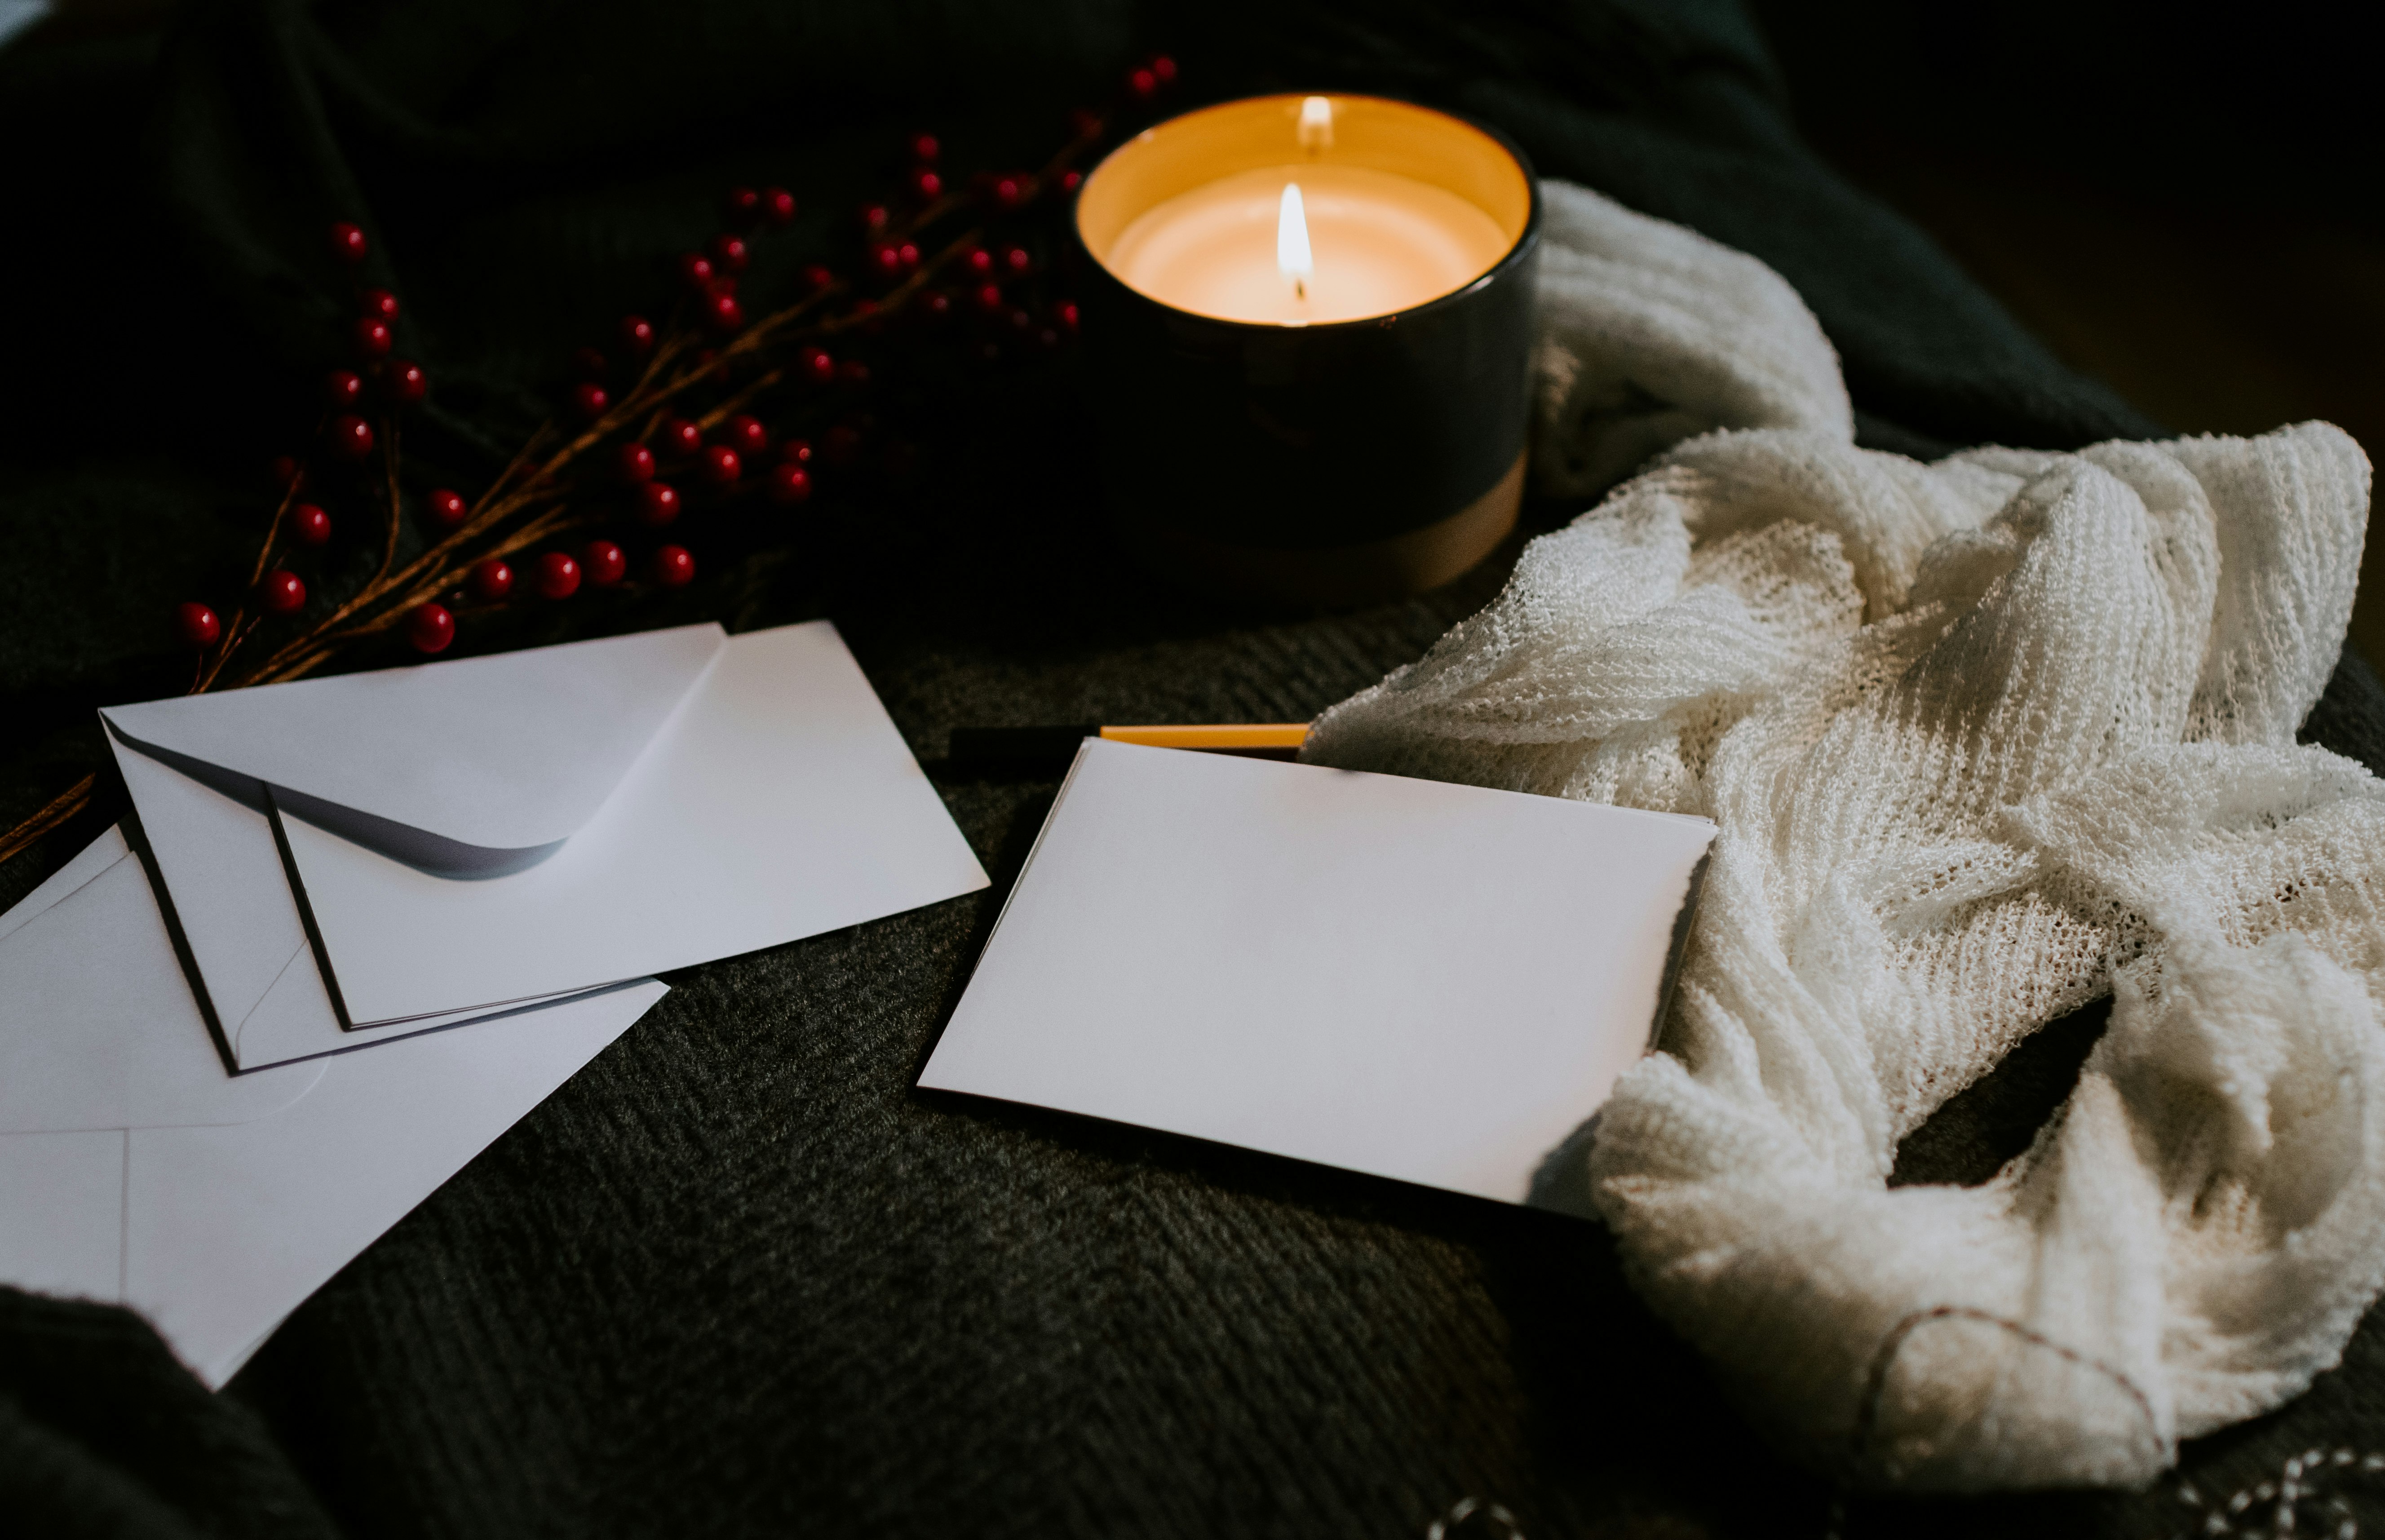 Blank cards on a table with envelopes and a candle